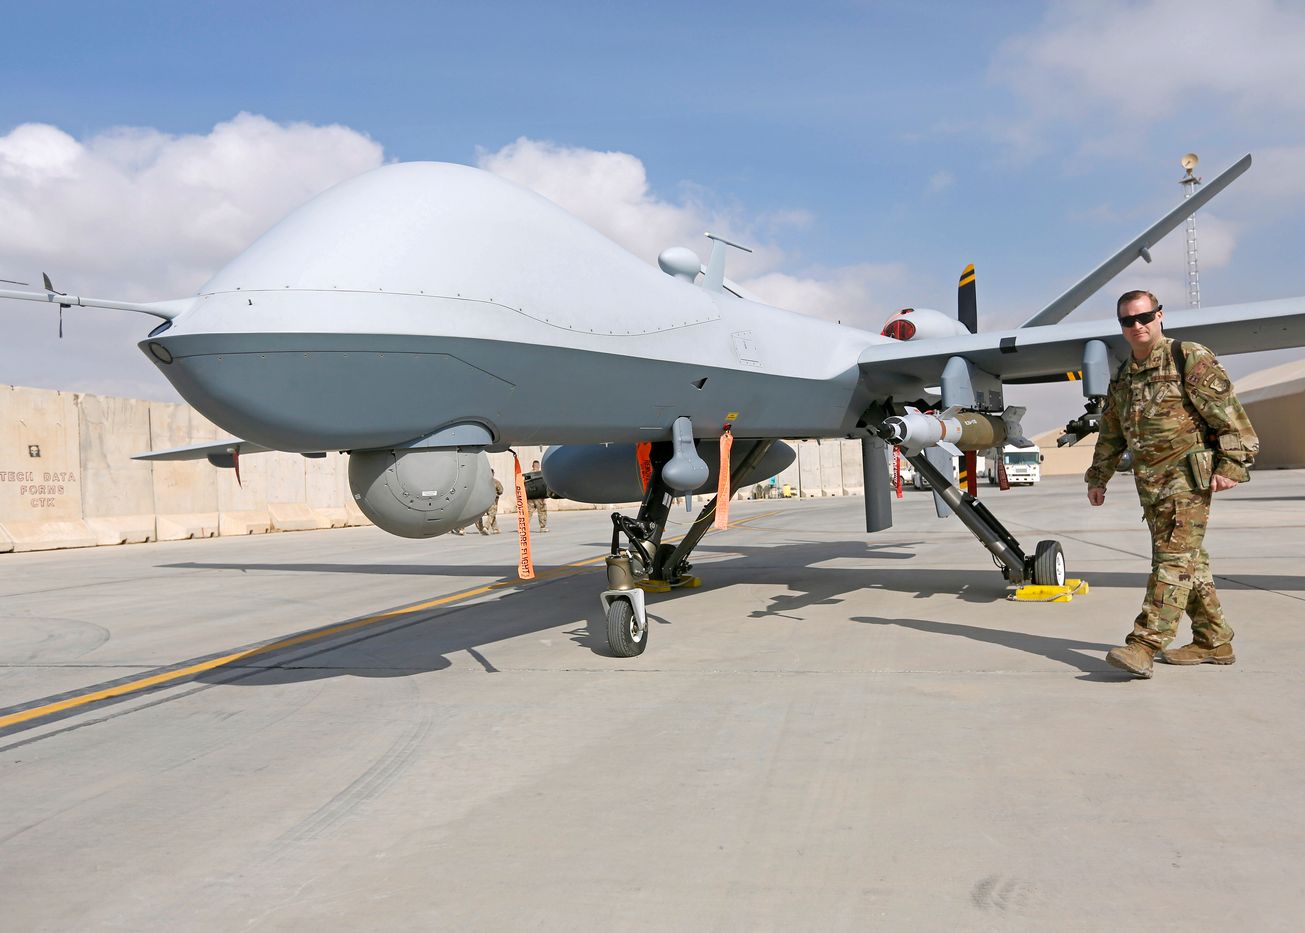 How a Single Drone Could Start a Large War